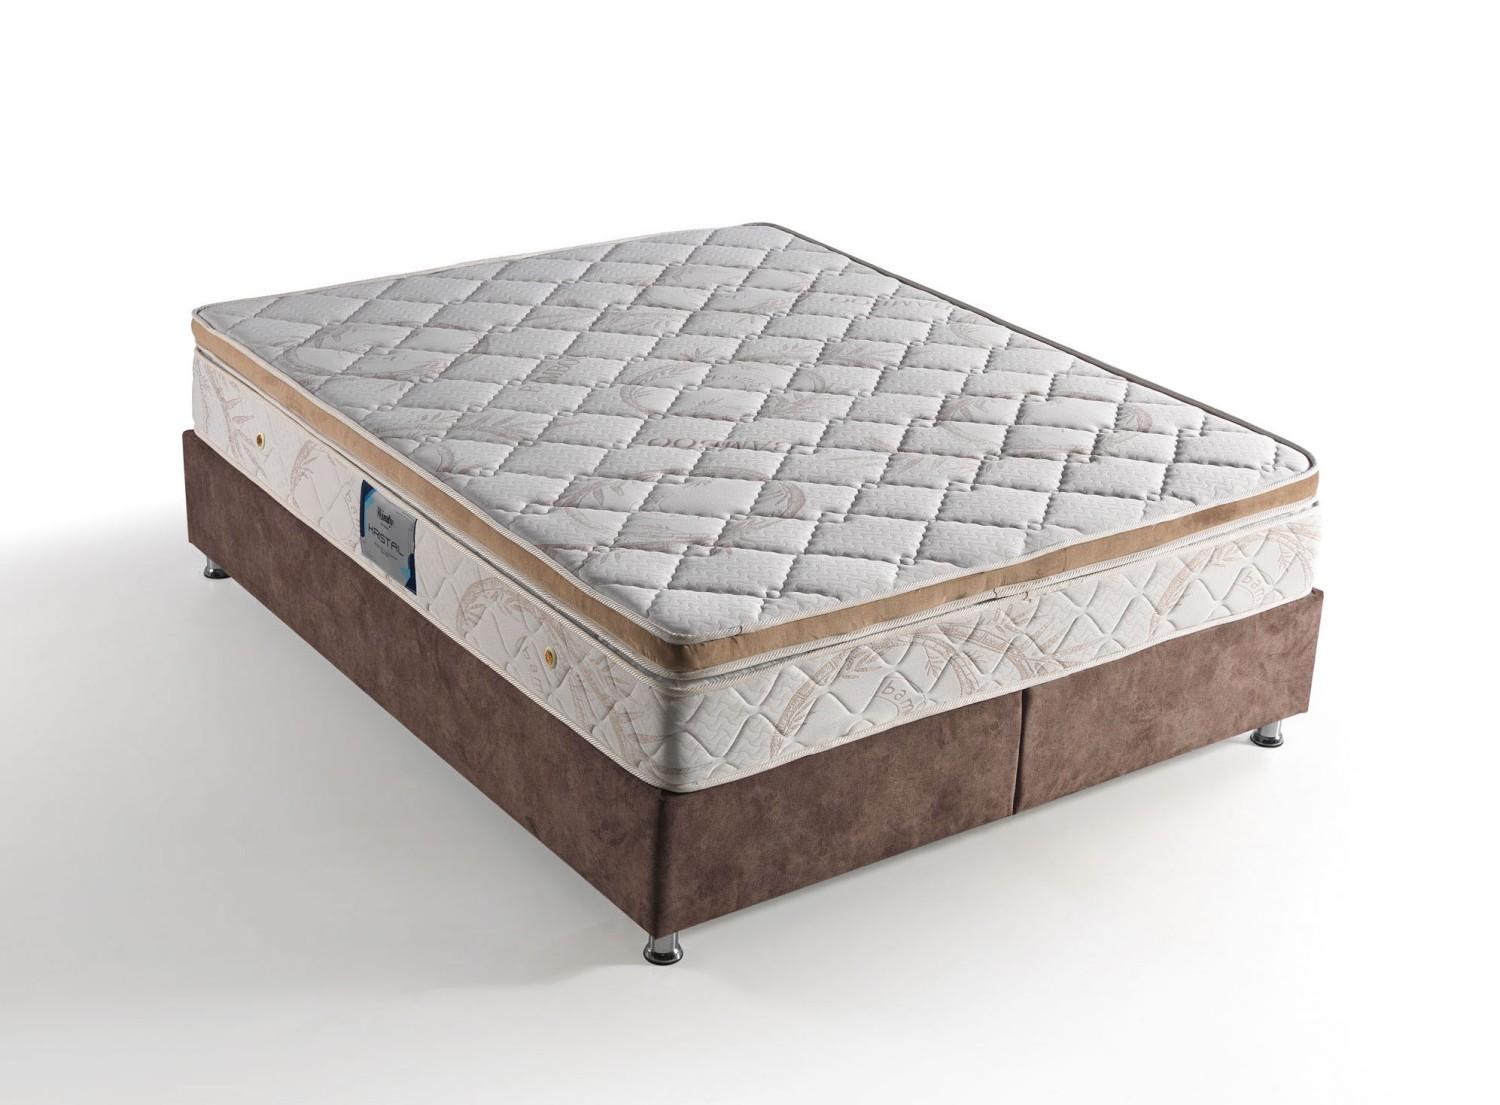 Mattress High quality 25cm king size mattress Extremely thick 200x200cm